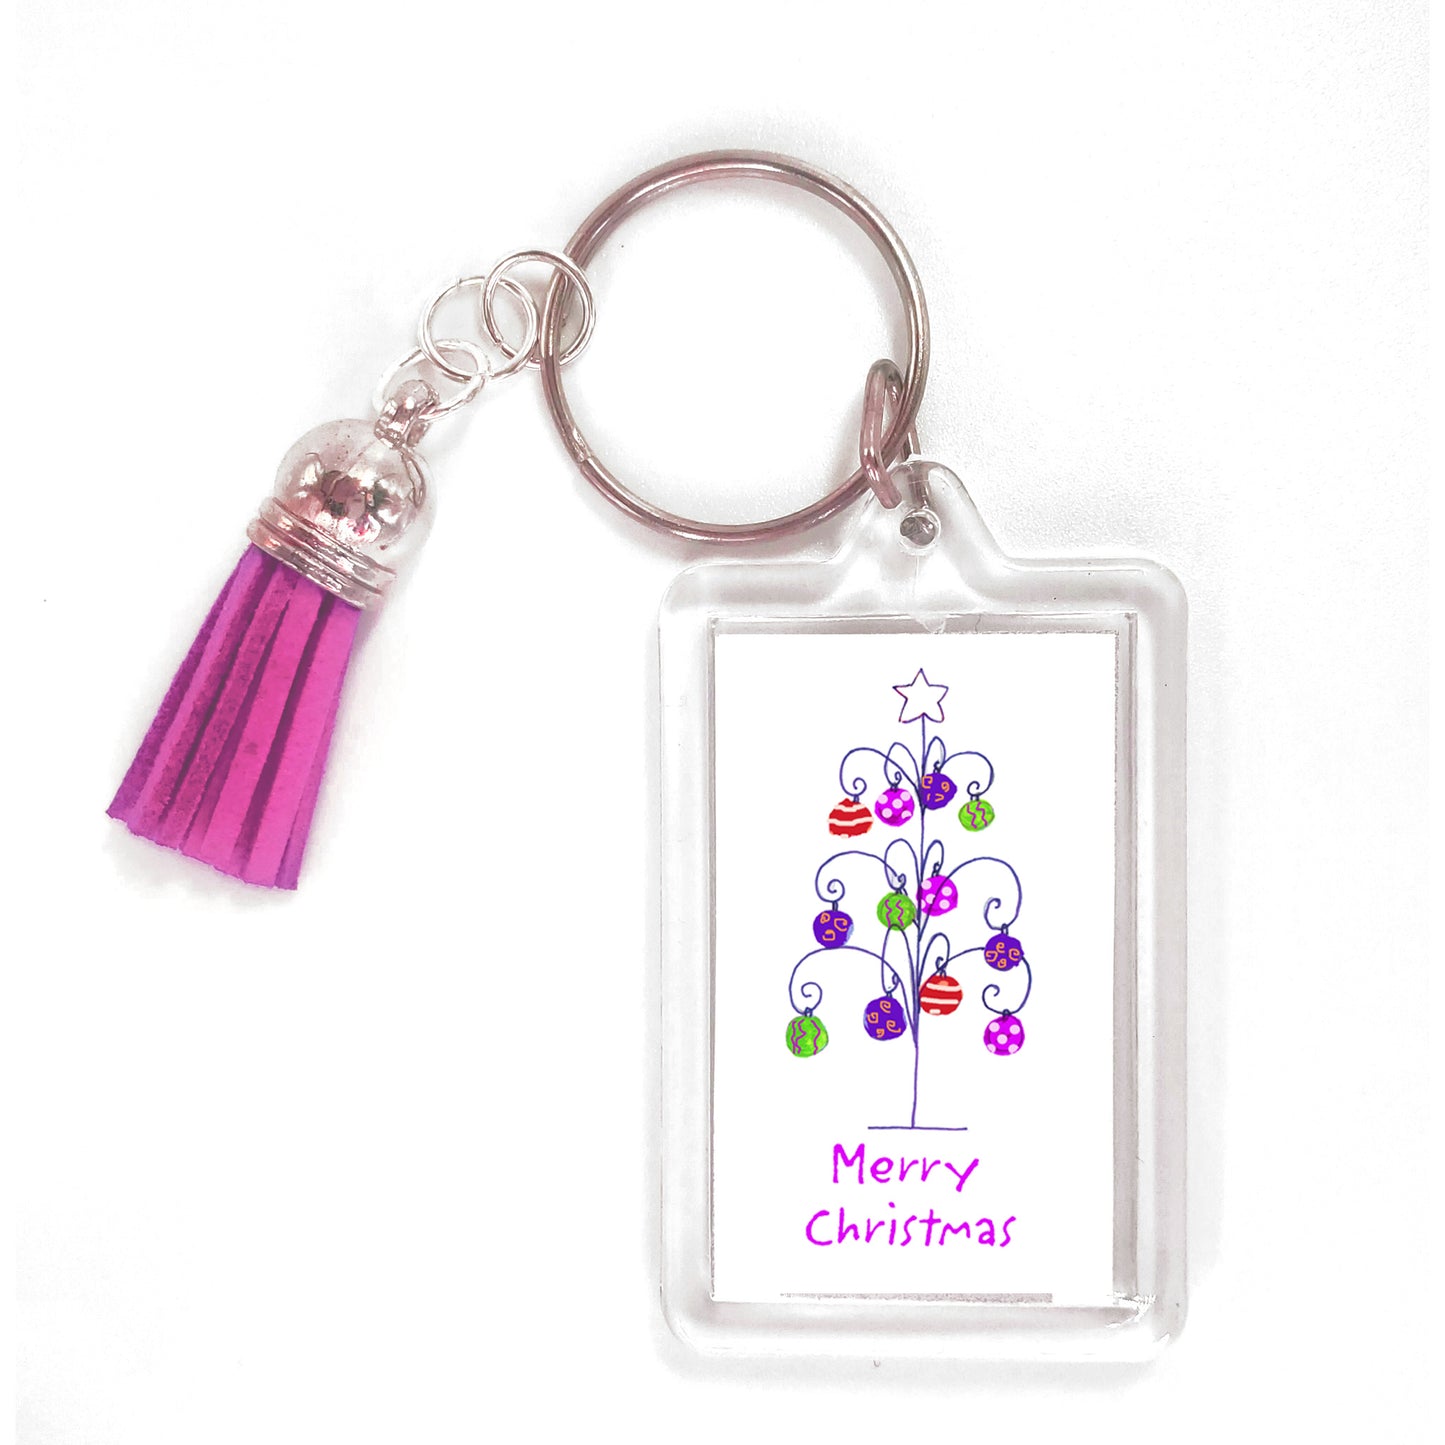 A Very Merry Christmas - A Wire Tree Keyring